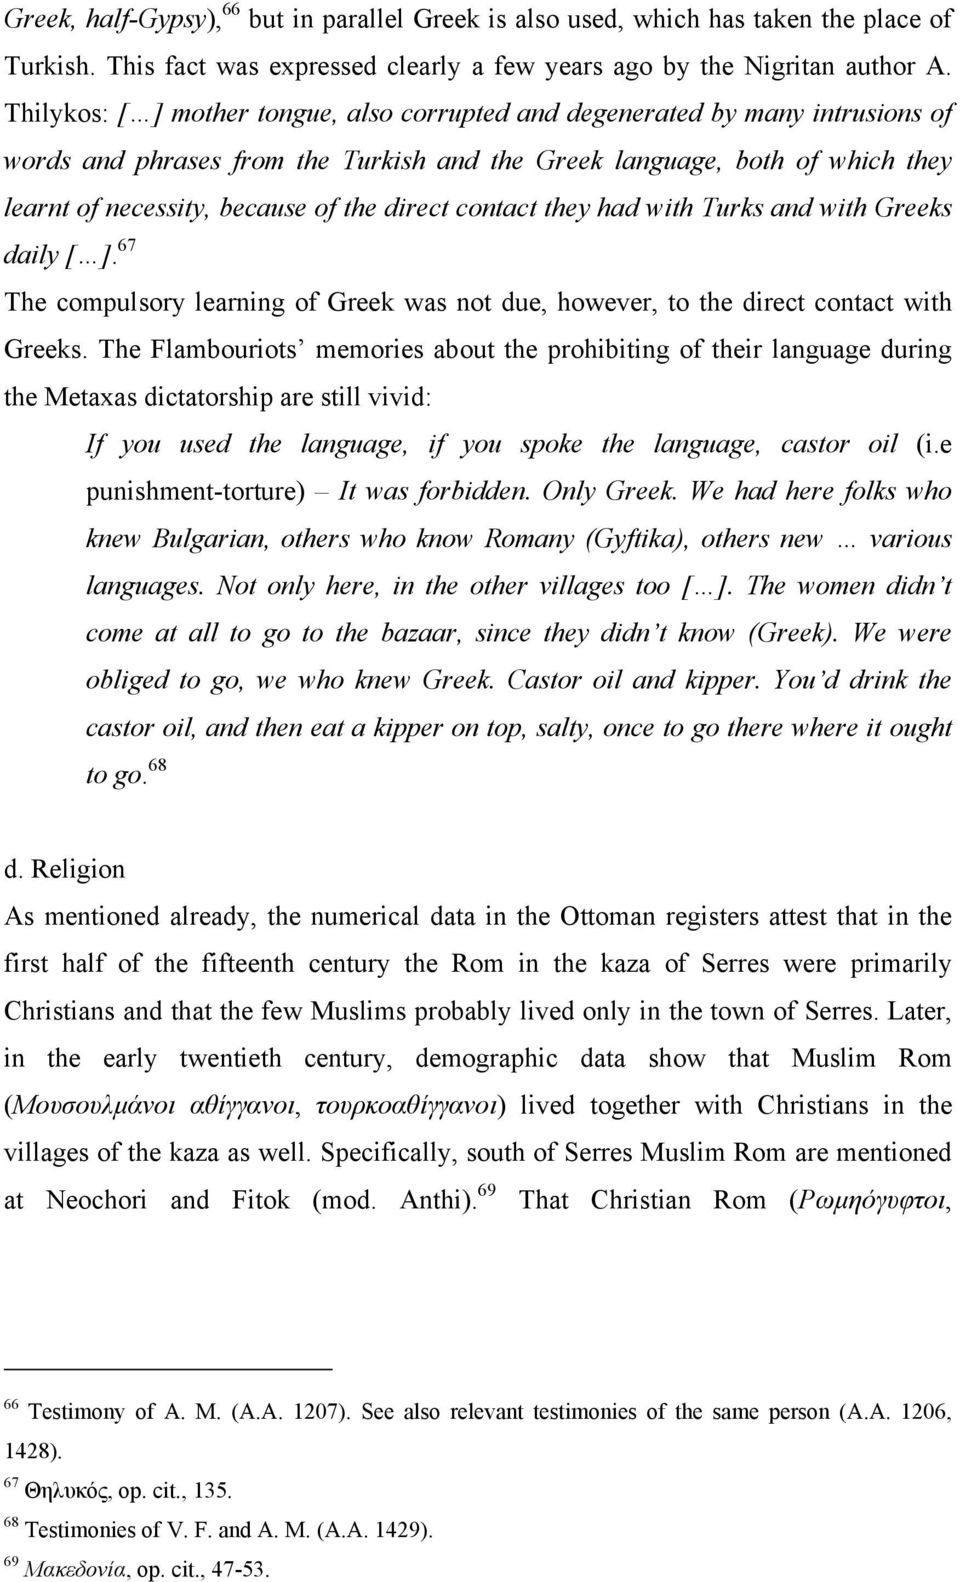 direct contact they had with Turks and with Greeks daily [ ]. 67 The compulsory learning of Greek was not due, however, to the direct contact with Greeks.